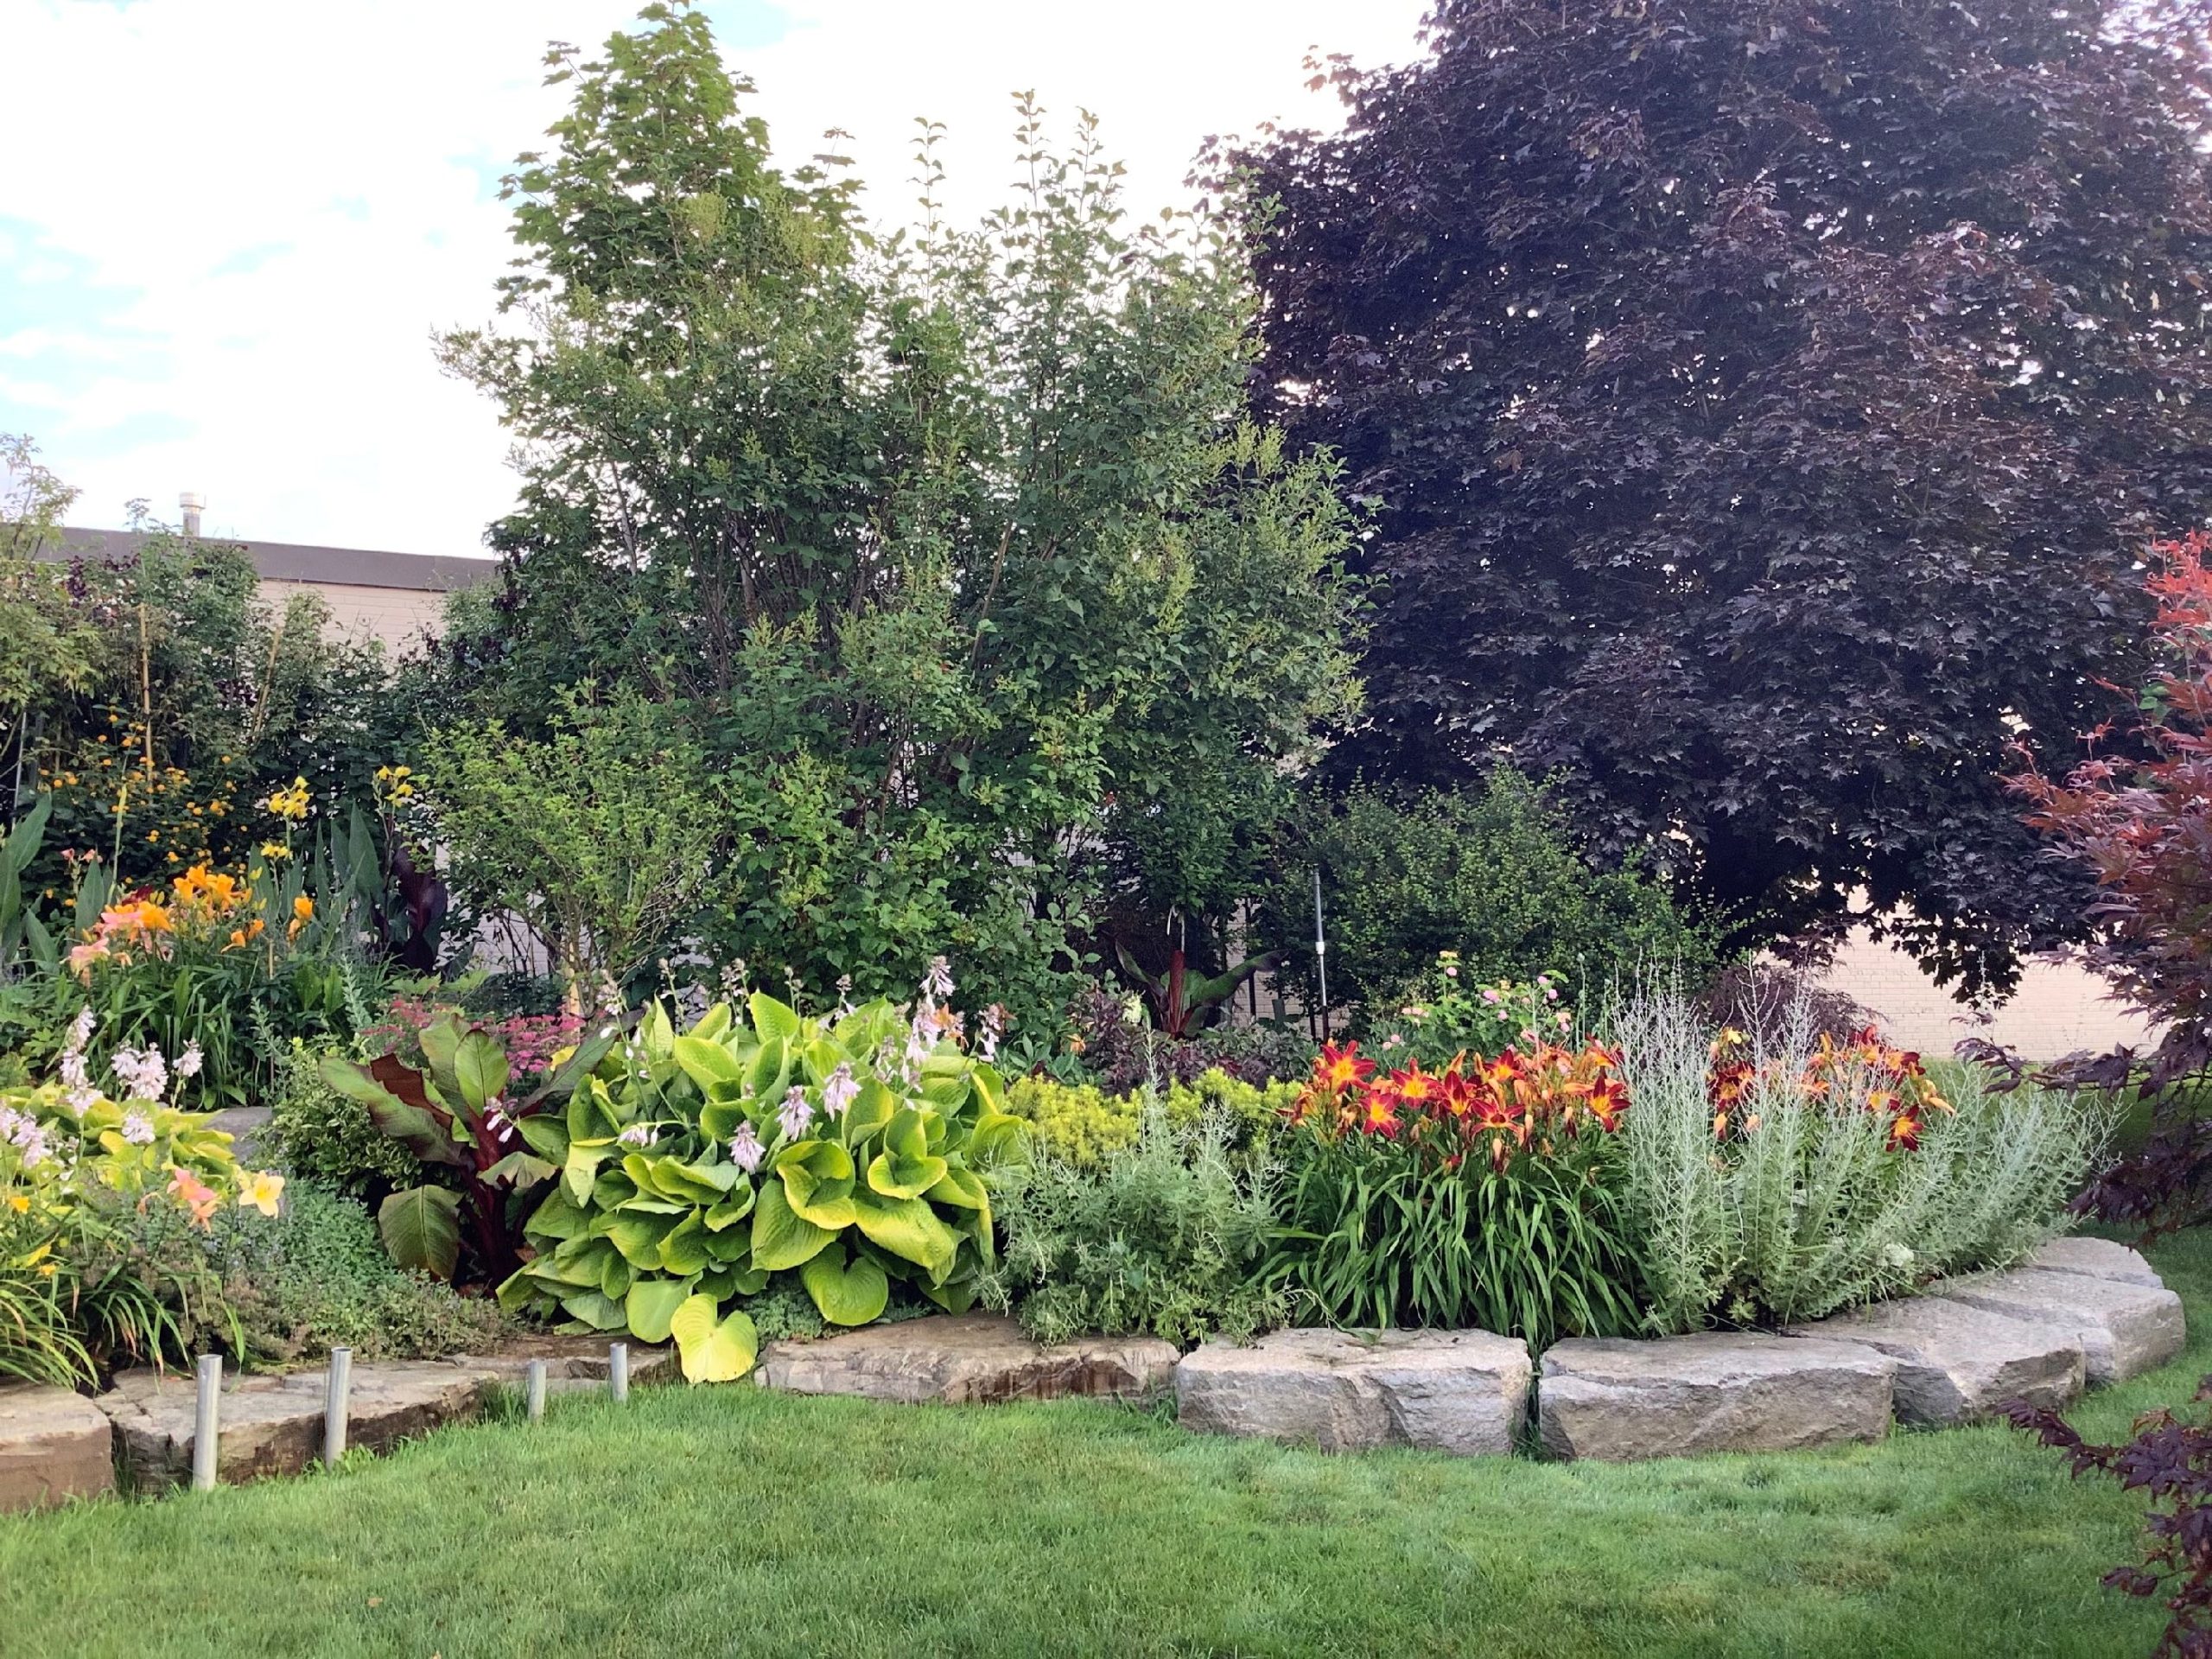 A photo of 2023’s commercial garden contest winner. The garden is filled with green plants with some orange flowers. There are stones on the edge of the garden and trees in the background.